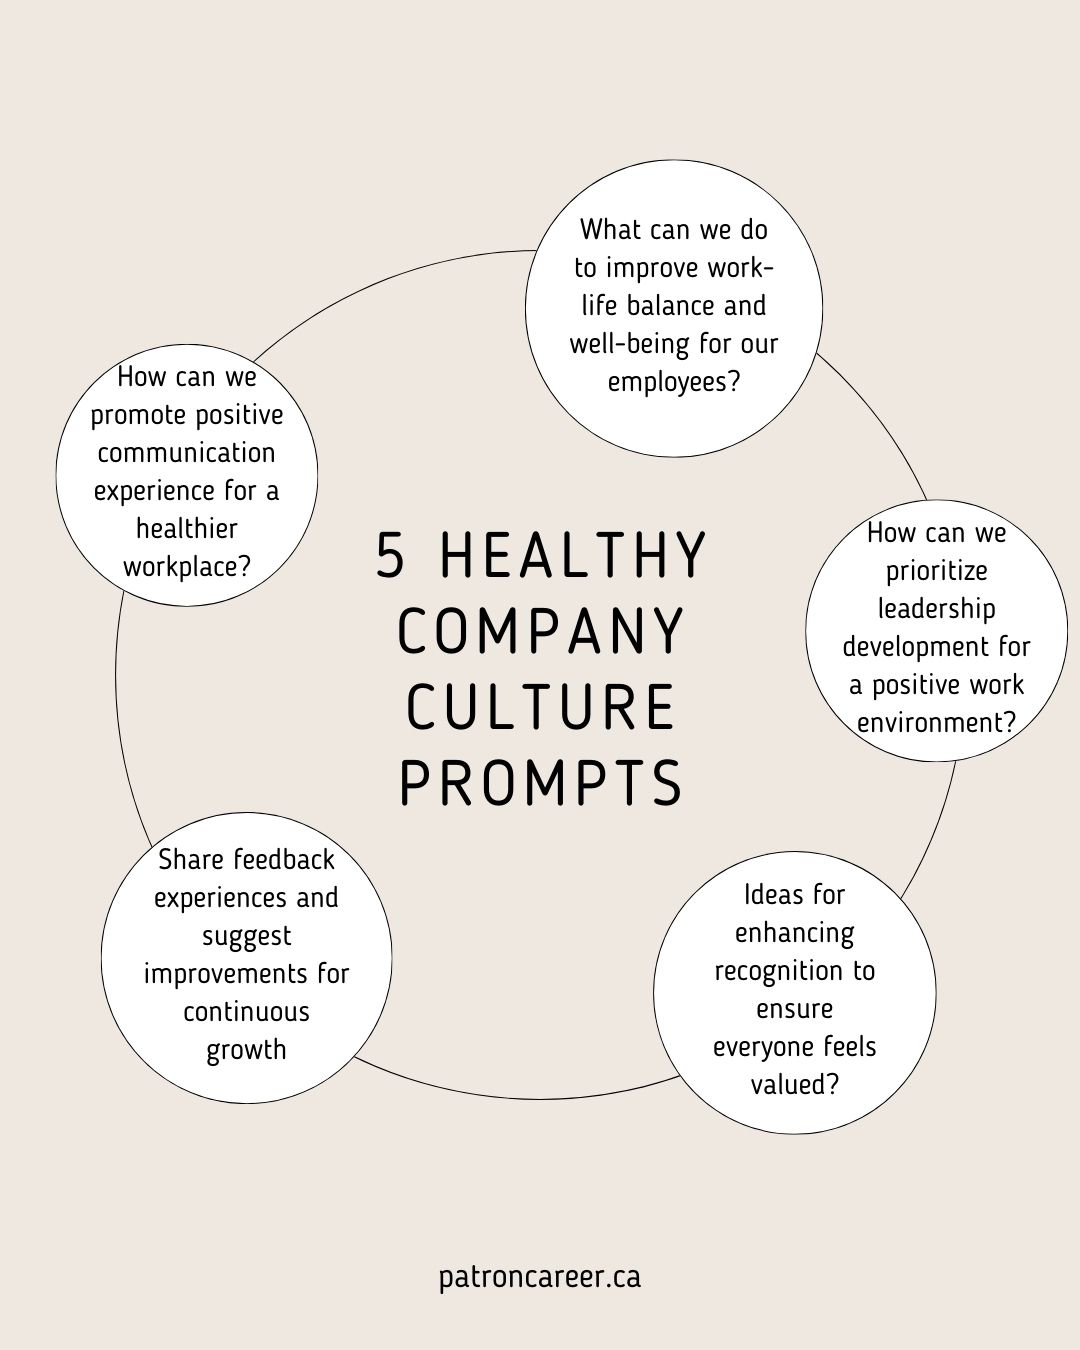 5 Healthy company culture prompts